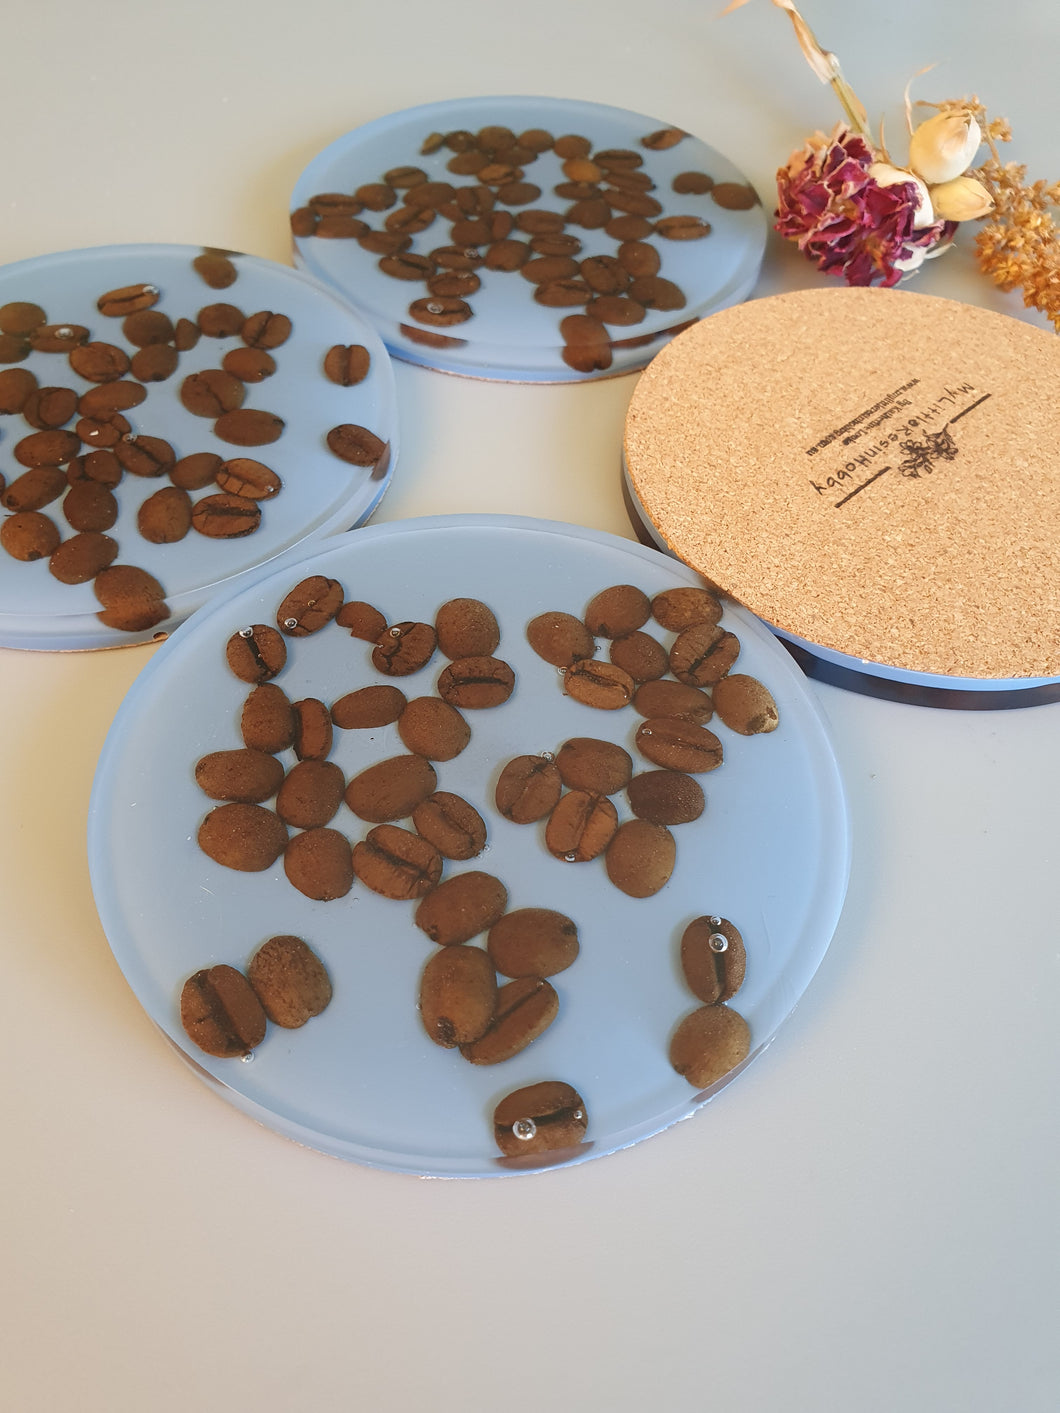 Fun coffee lover set of coasters with organic coffee beans encased in resin with a coloured background to brighten up your daily coffee while pairing as functional art. Created by Katherine Looke, Owner of Mylittleresinhobby.